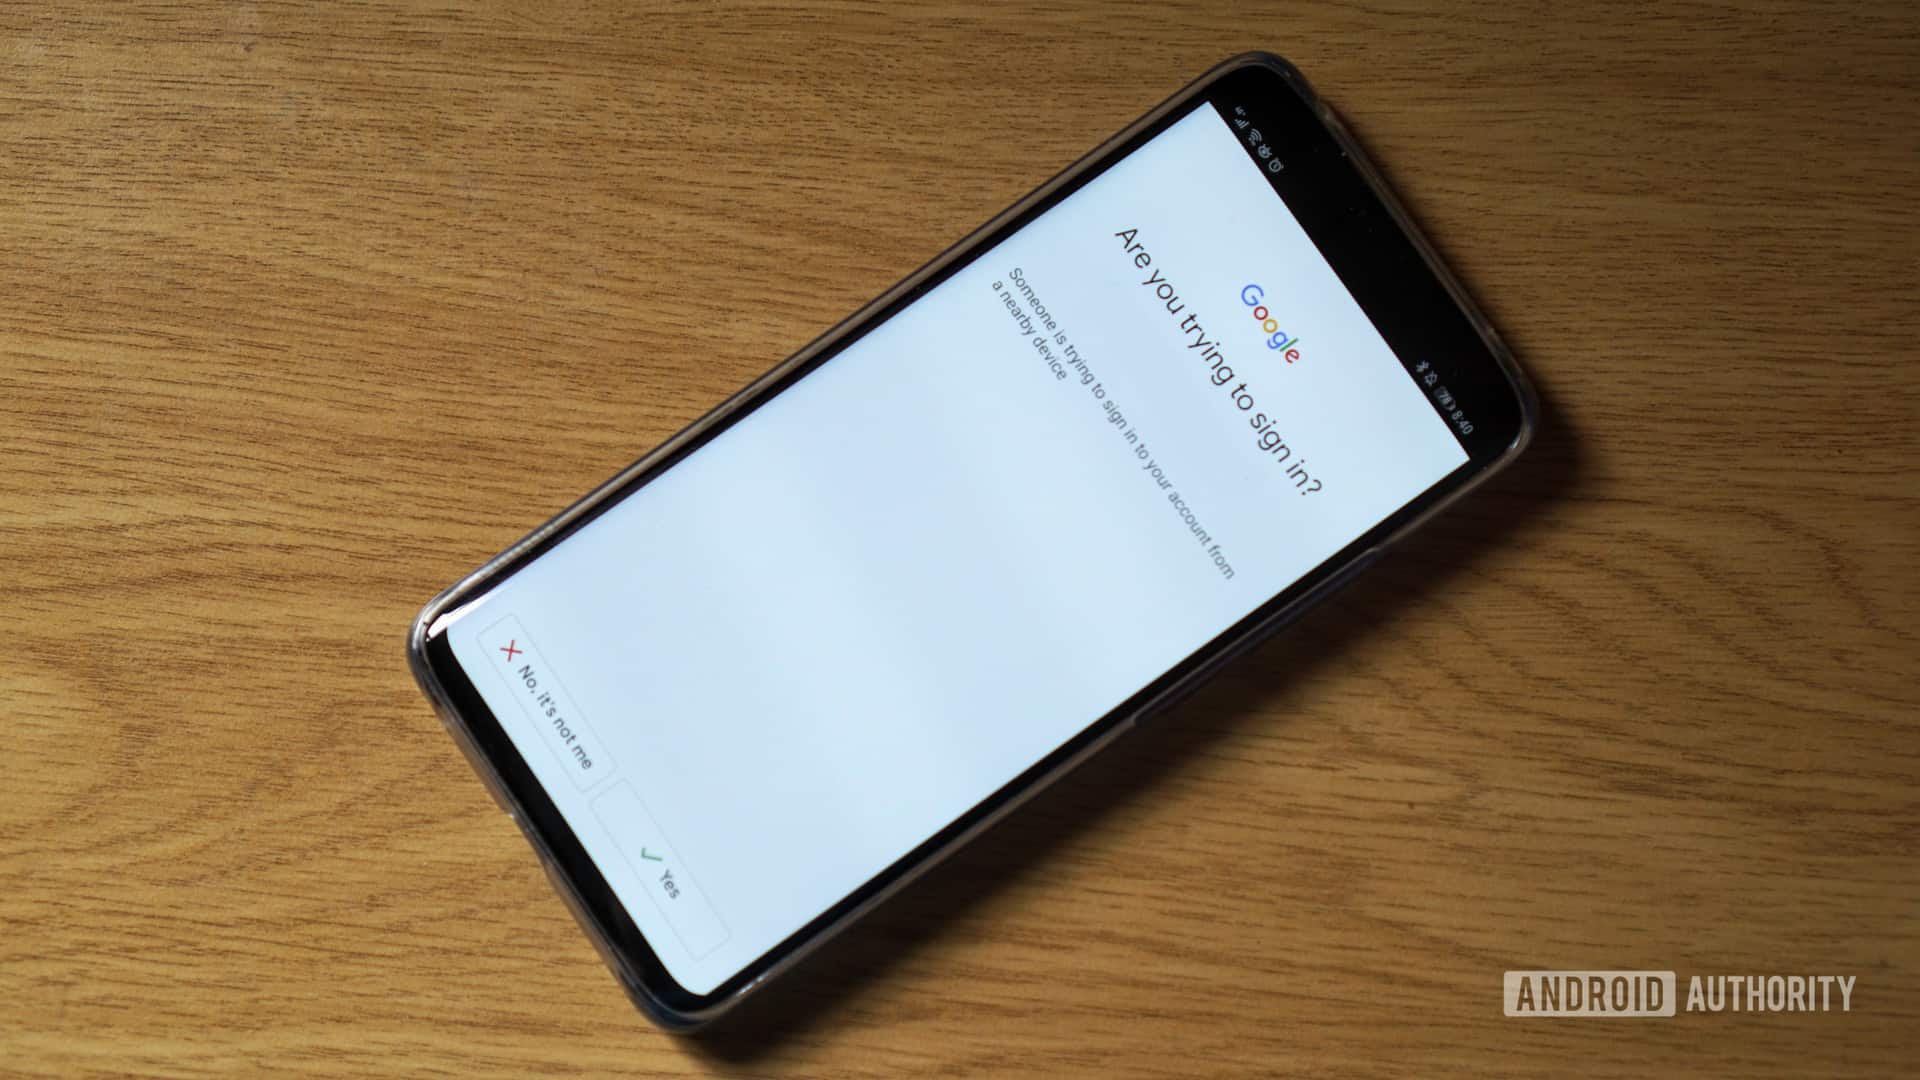 Google lets you use your phone as a hardware security key for two-factor authentication.